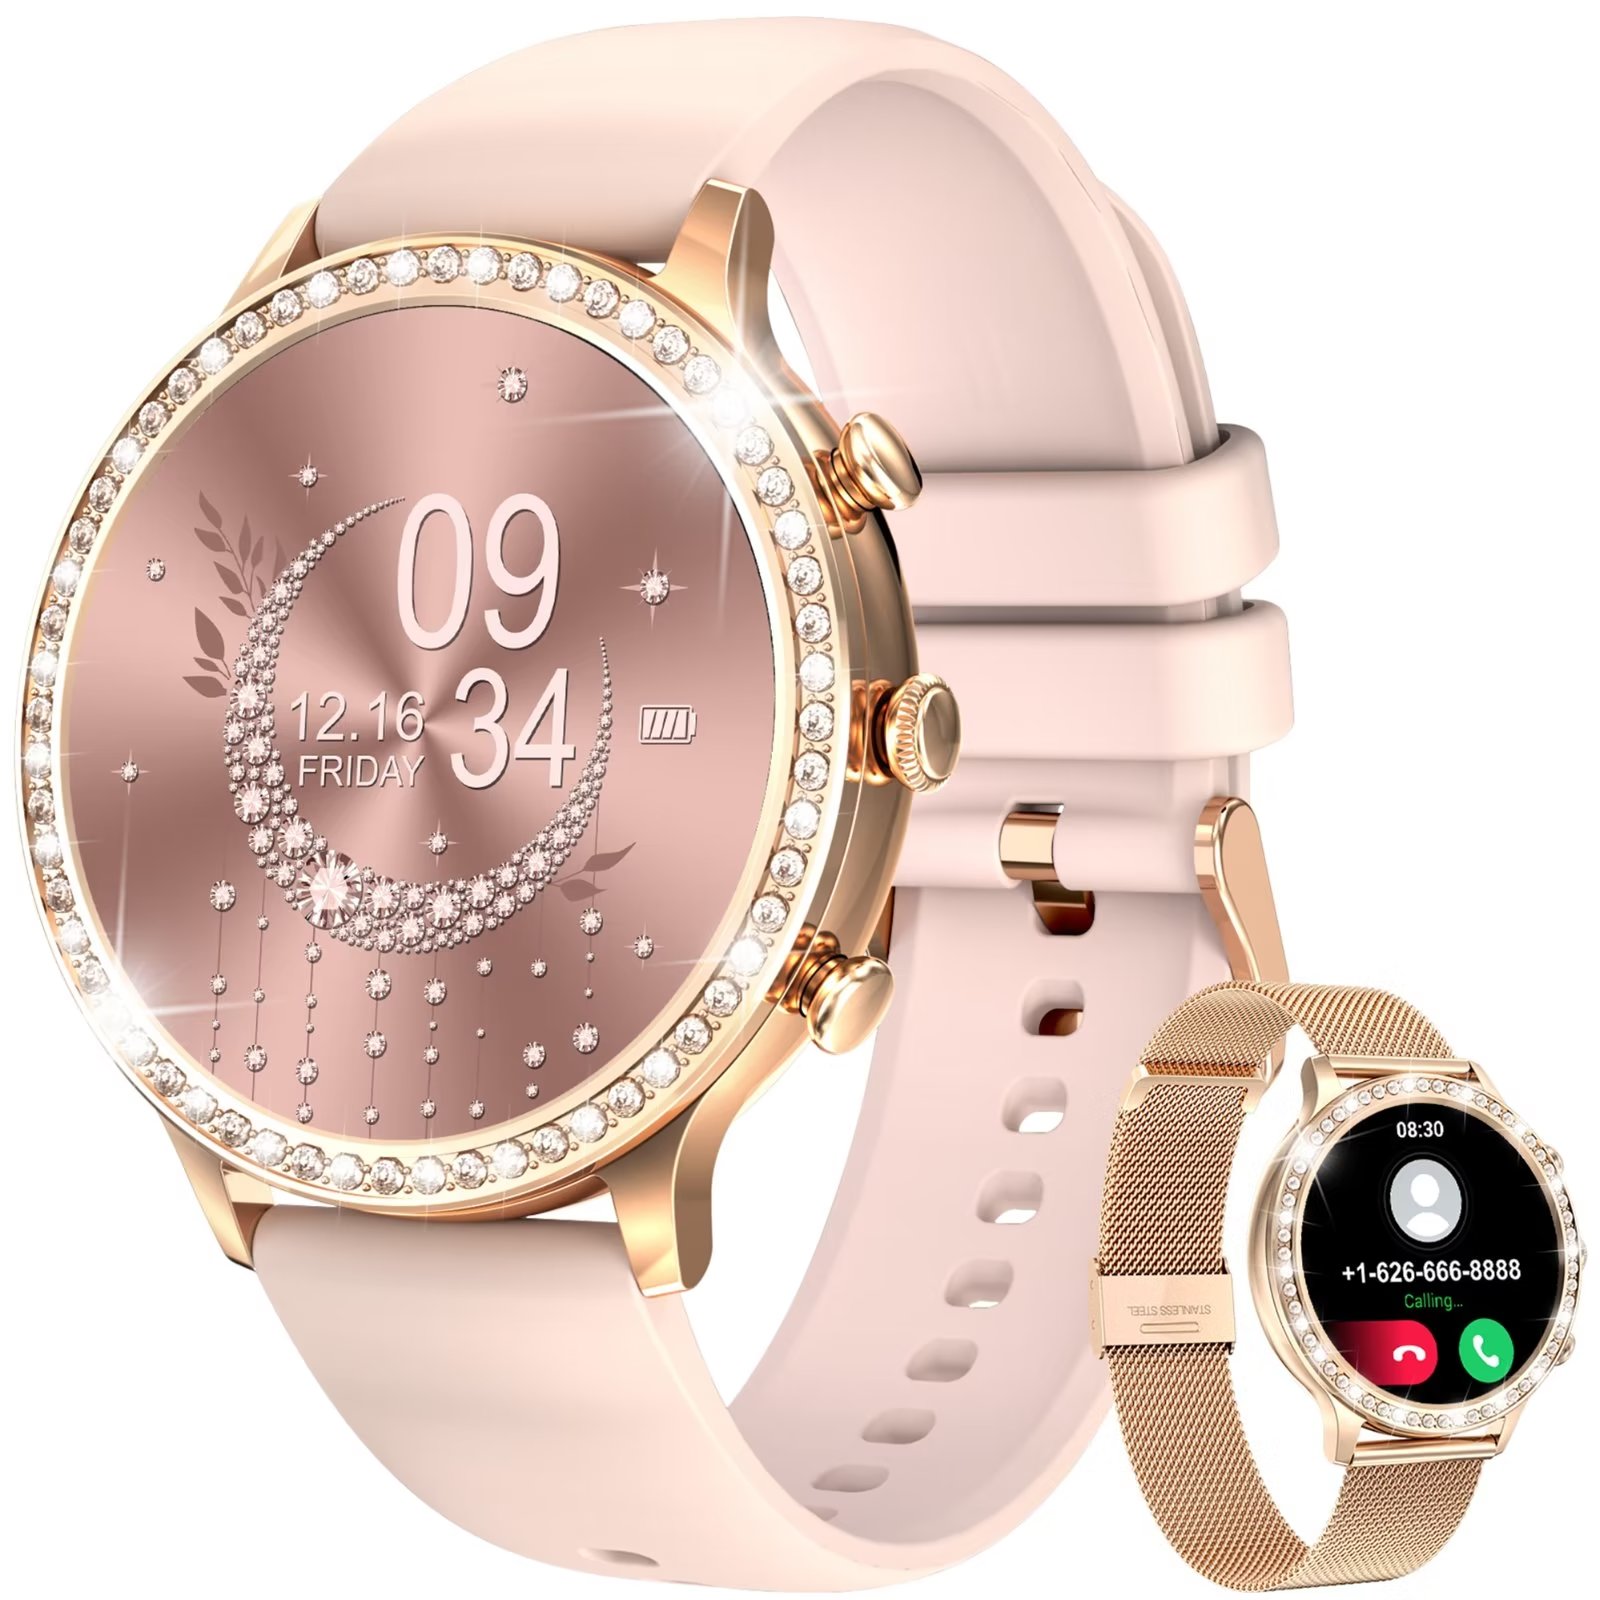 LIGE Women Smart Watches for Android iPhone Bluetooth Call Custom Dials Smartwatch Golden - image 1 of 11